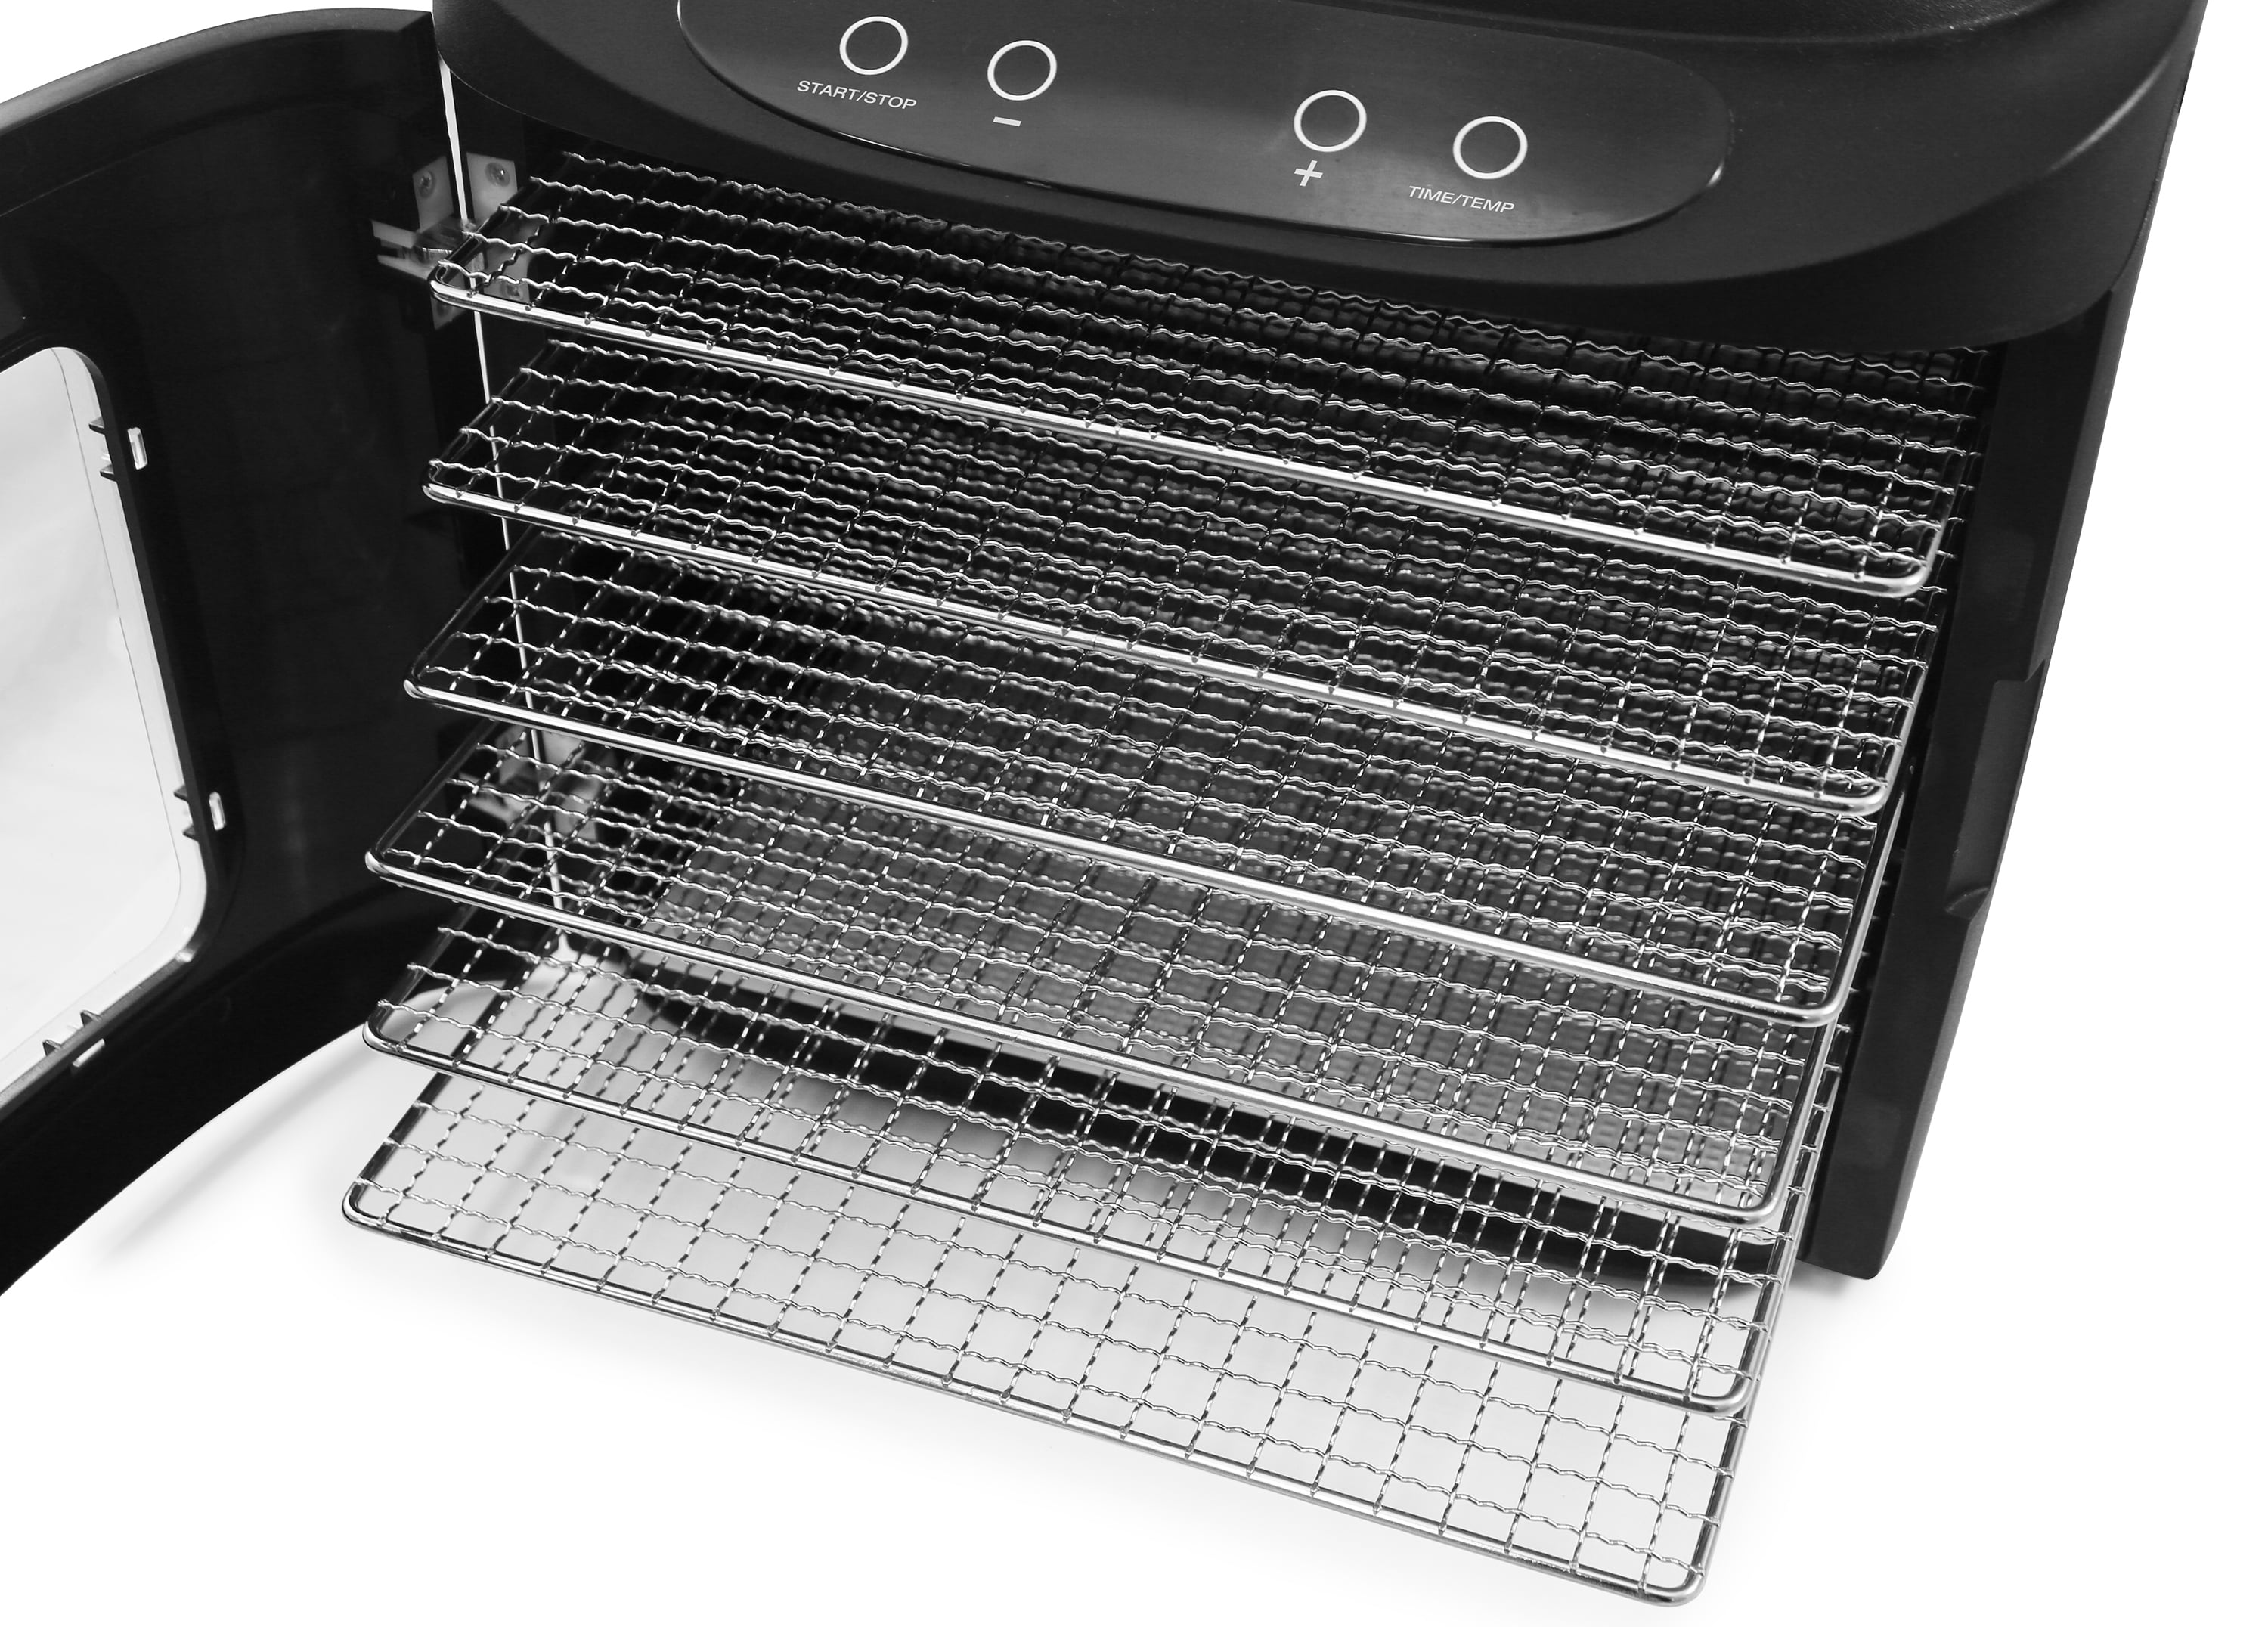 Electric Food Dehydrator, Stainless Steel Trays – Shop Elite Gourmet -  Small Kitchen Appliances